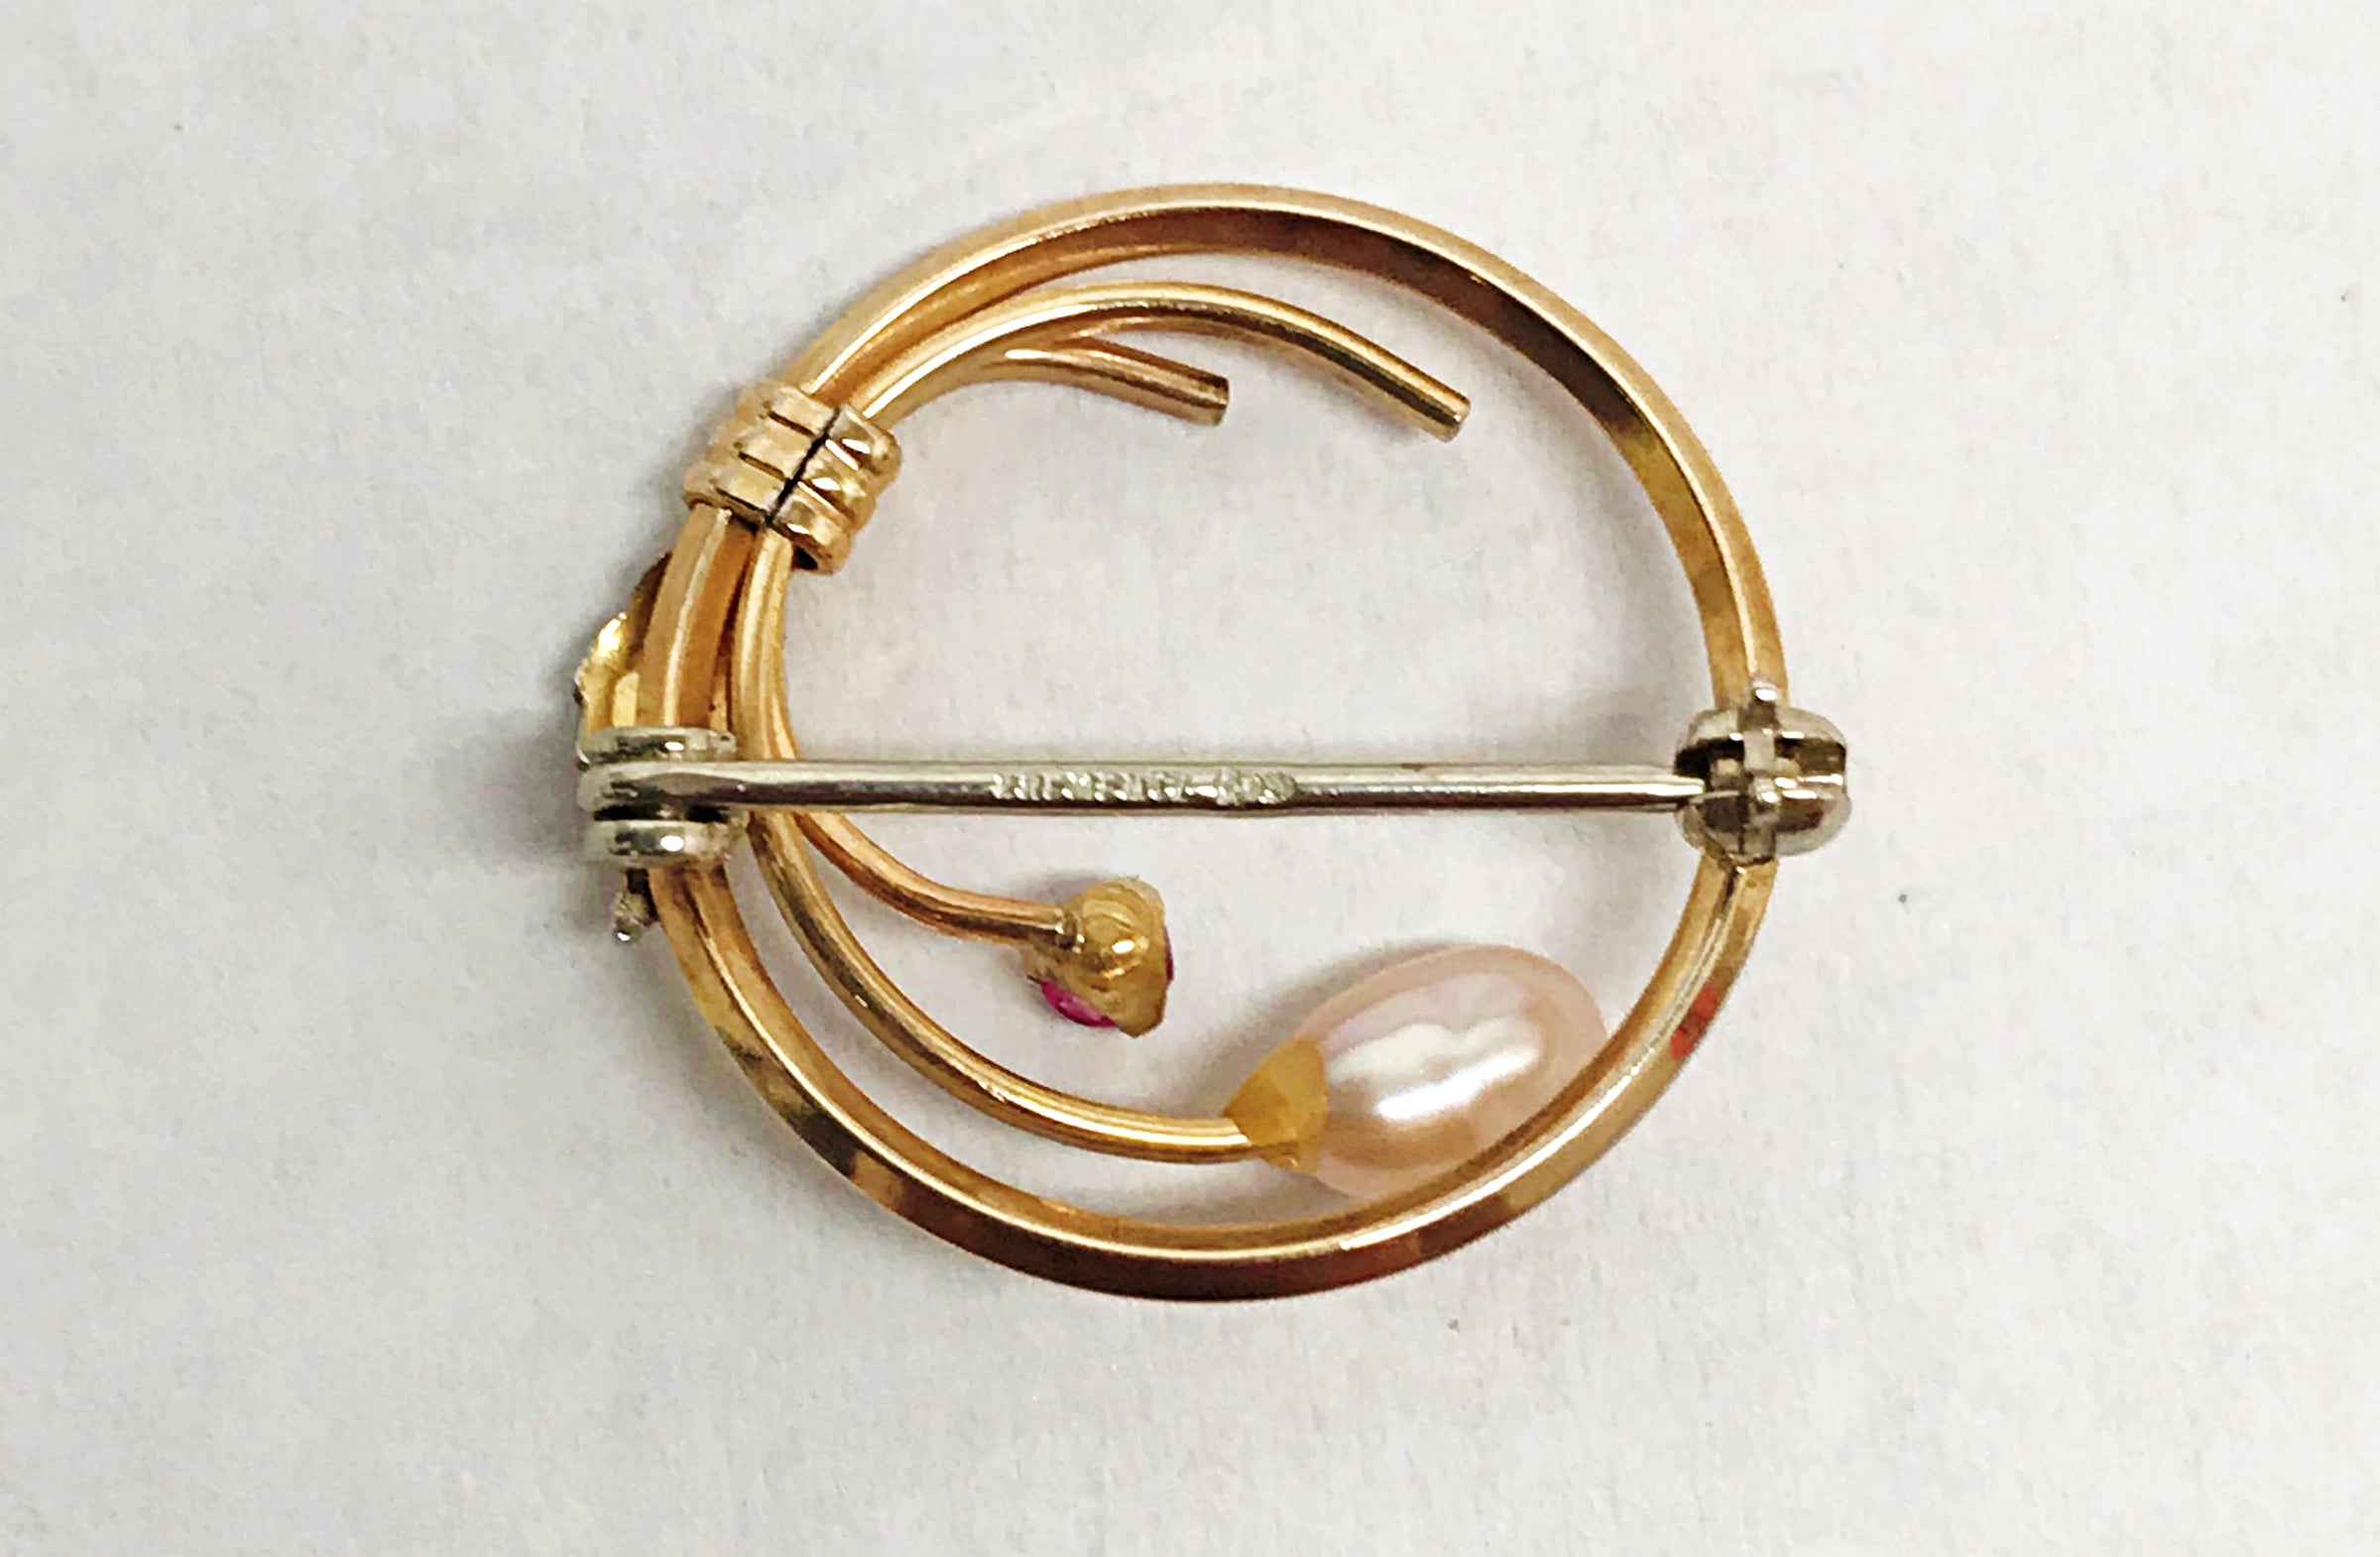 www.hersandhistreasures.com/products/krementz-gold-tone-round-brooch-pin-with-genuine-ruby-and-pearl